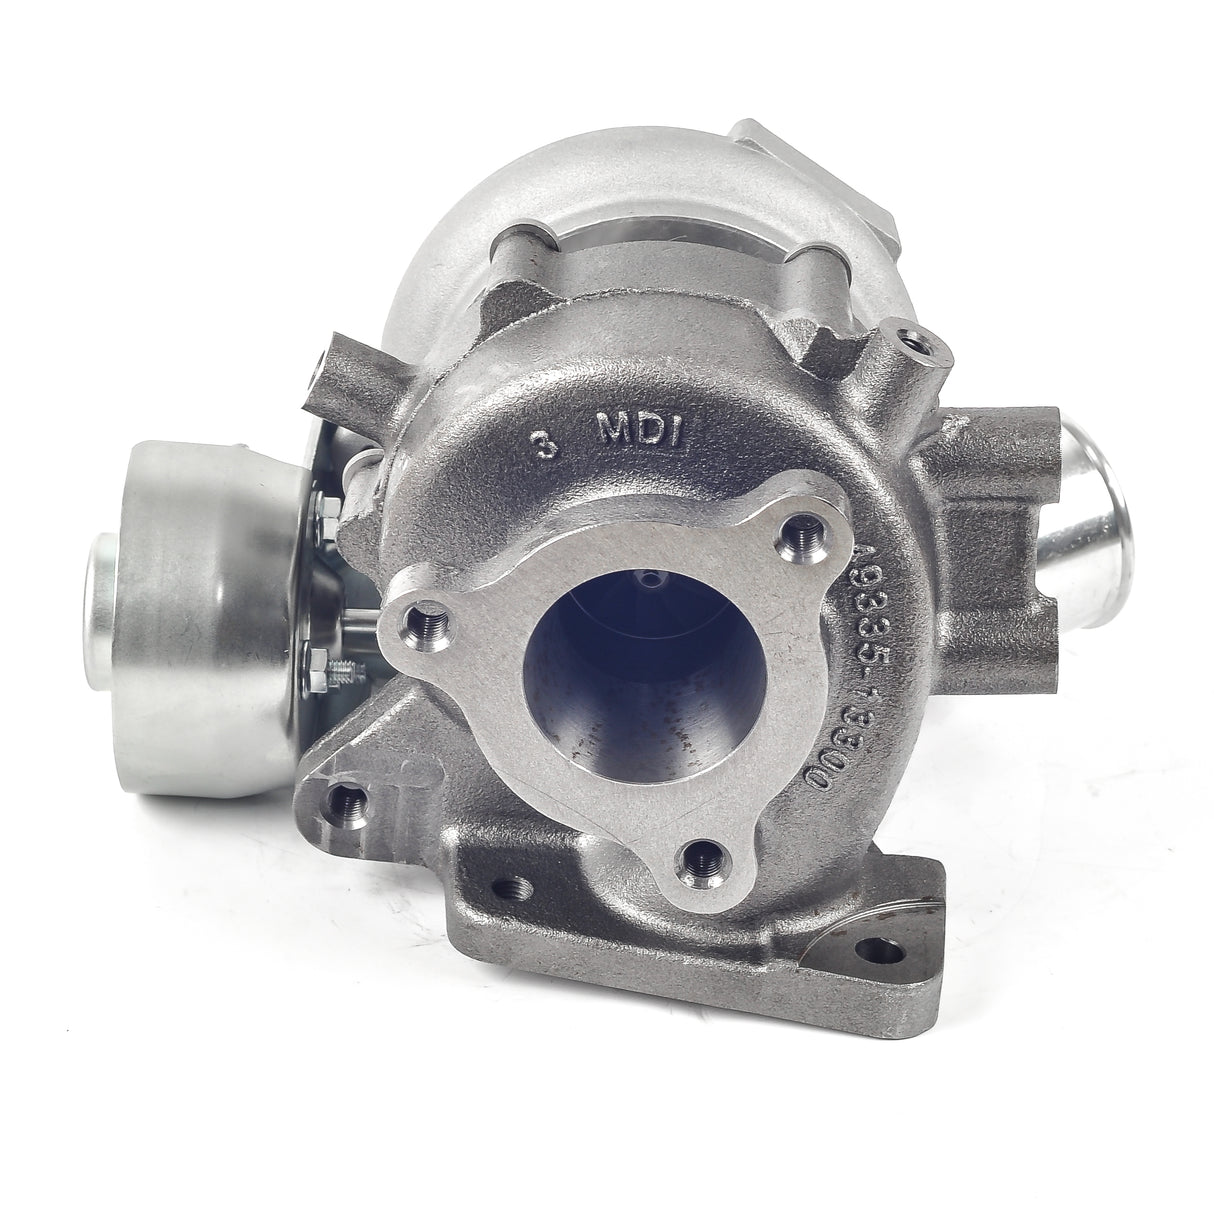 This is a 𝐒𝐓𝐀𝐆𝐄 𝟐 CCT Upgrade Hi-Flow Turbocharger To Suit Mitsubishi MQ Triton 4N15 2.4L 1515A295